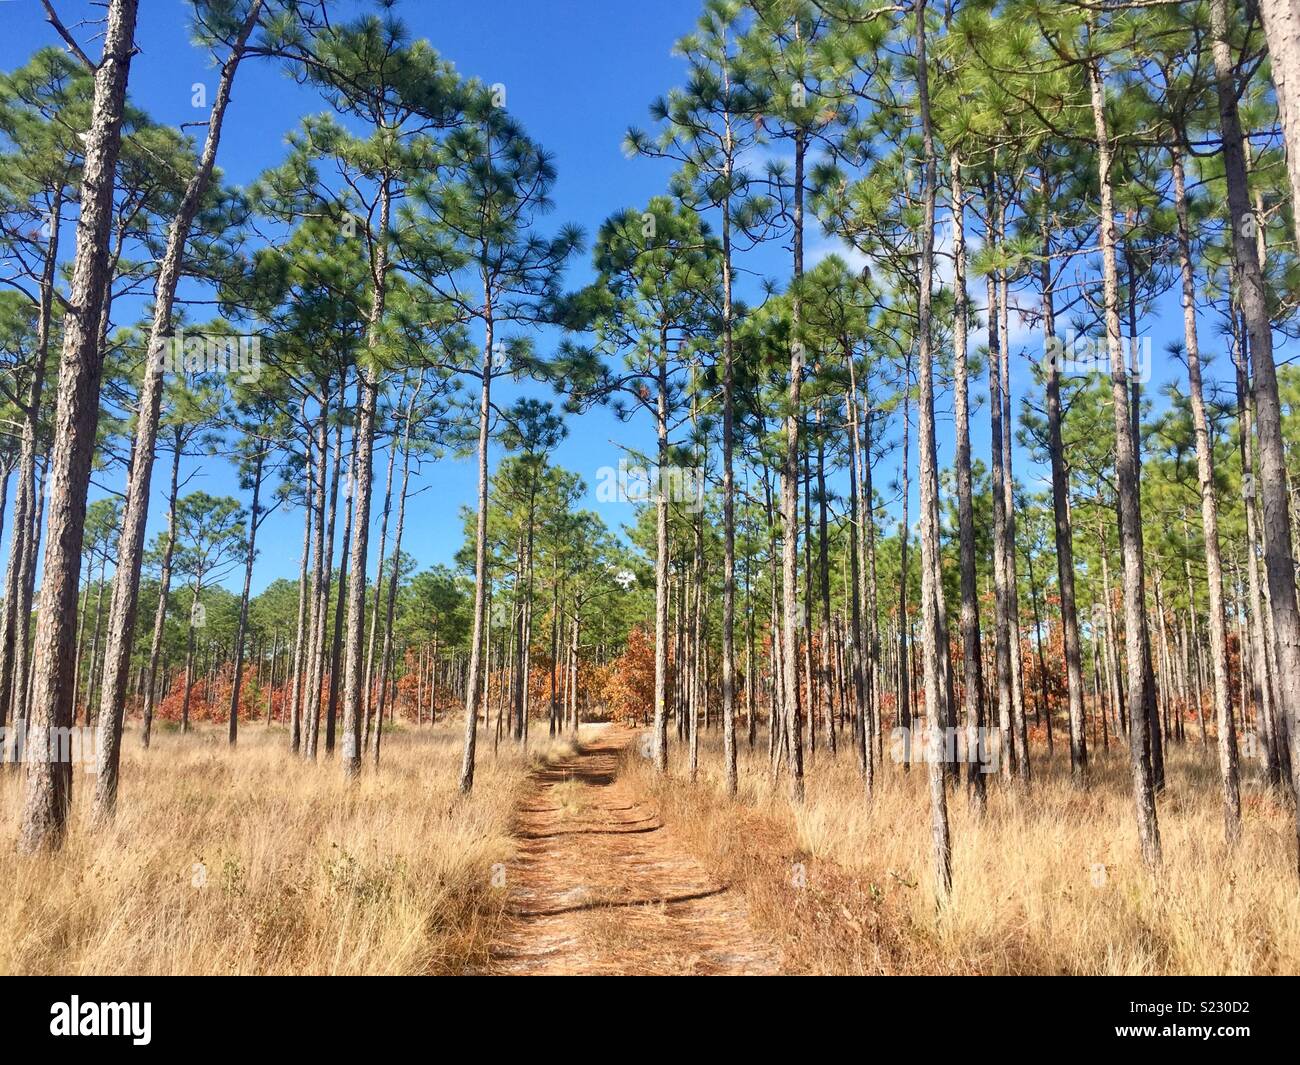 Dirt road through a pine forest Stock Photo